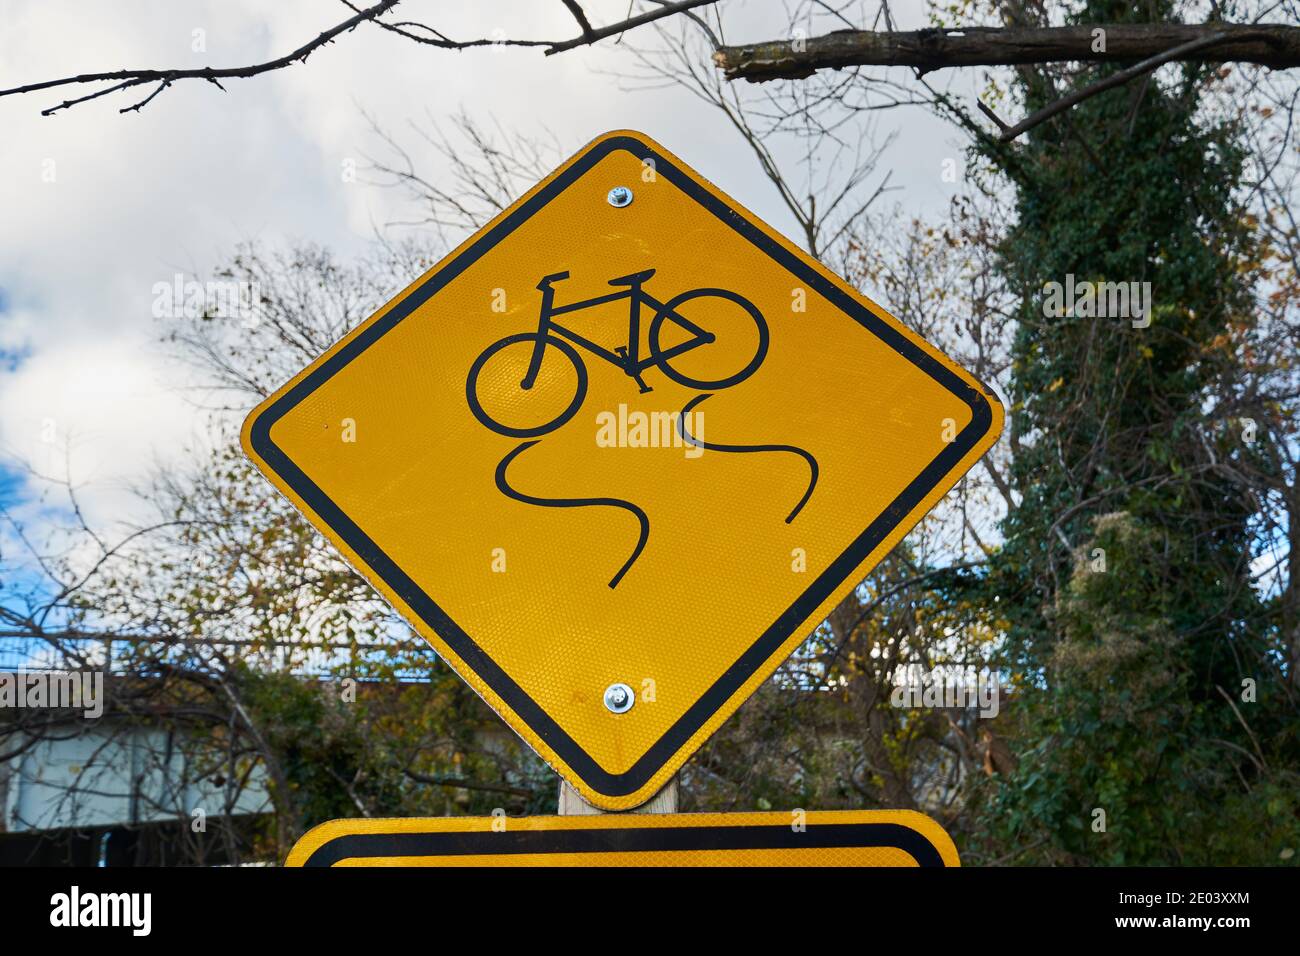 Slippery When Wet: Slippery When Wet (symbol) - Bicycle